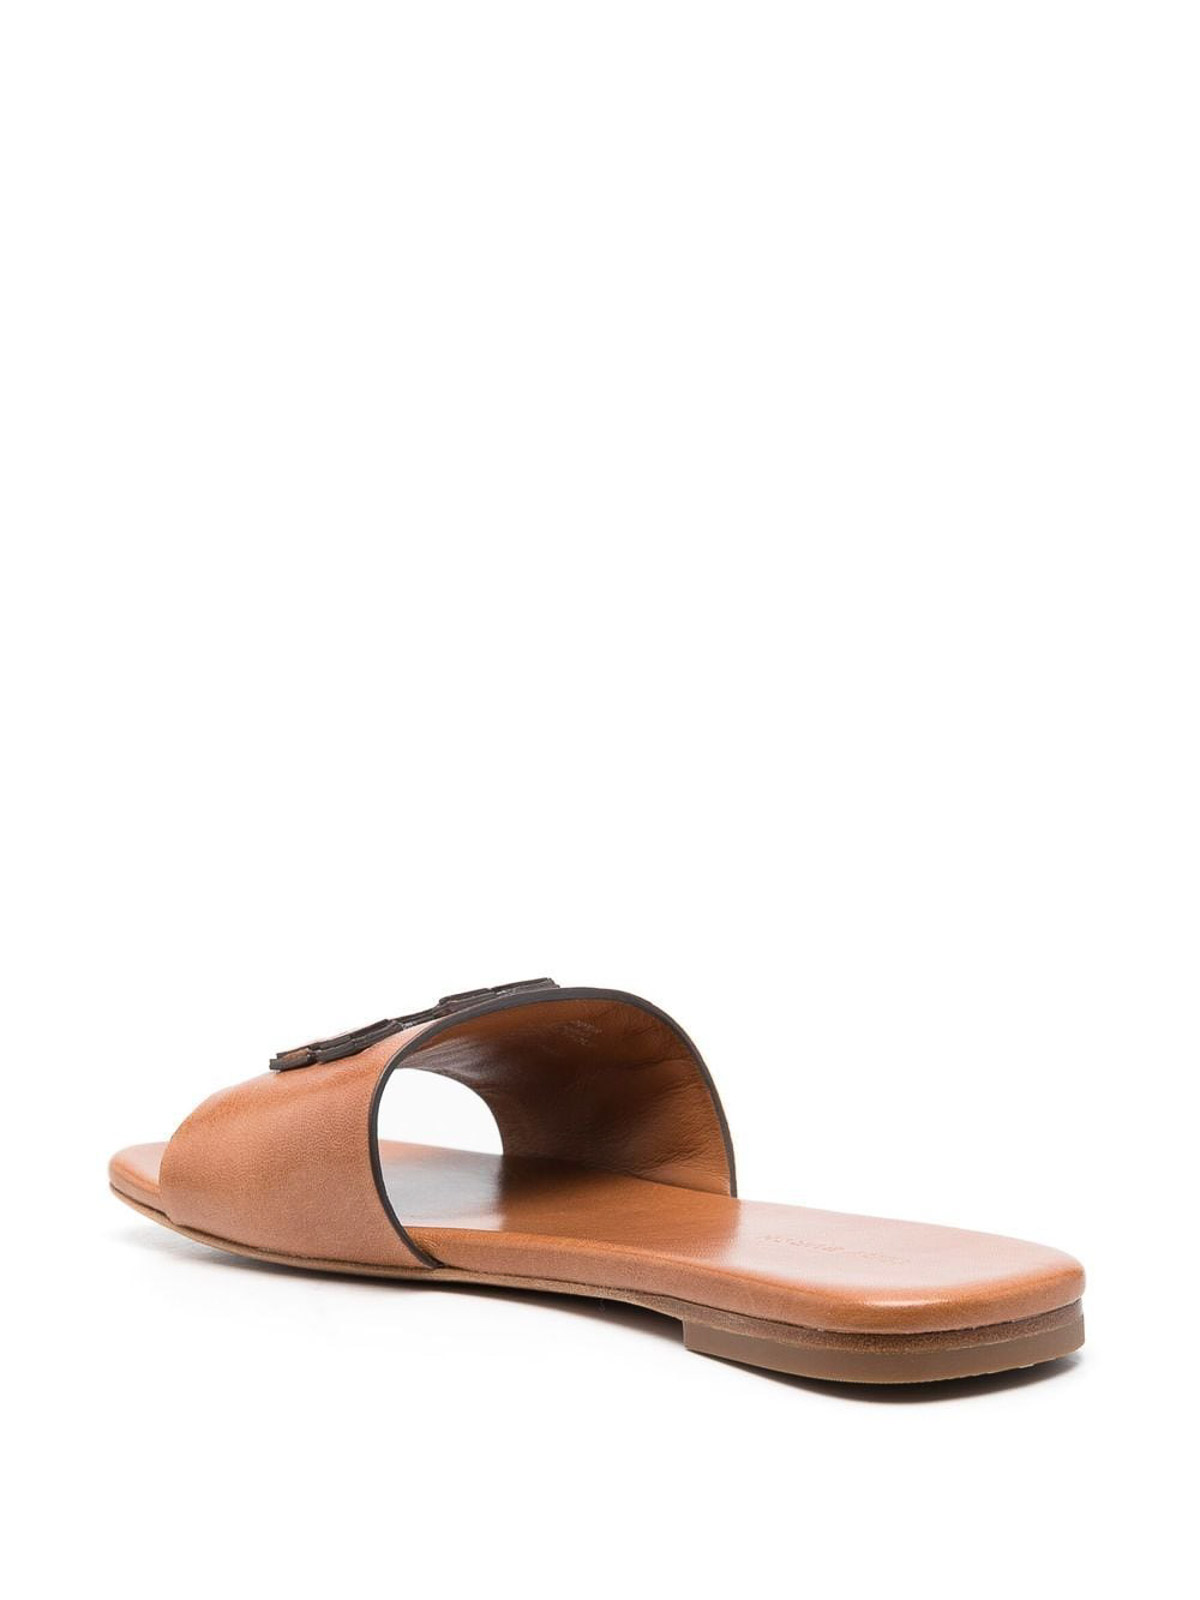 Shop Tory Burch Ines Leather Sandals In Marrón